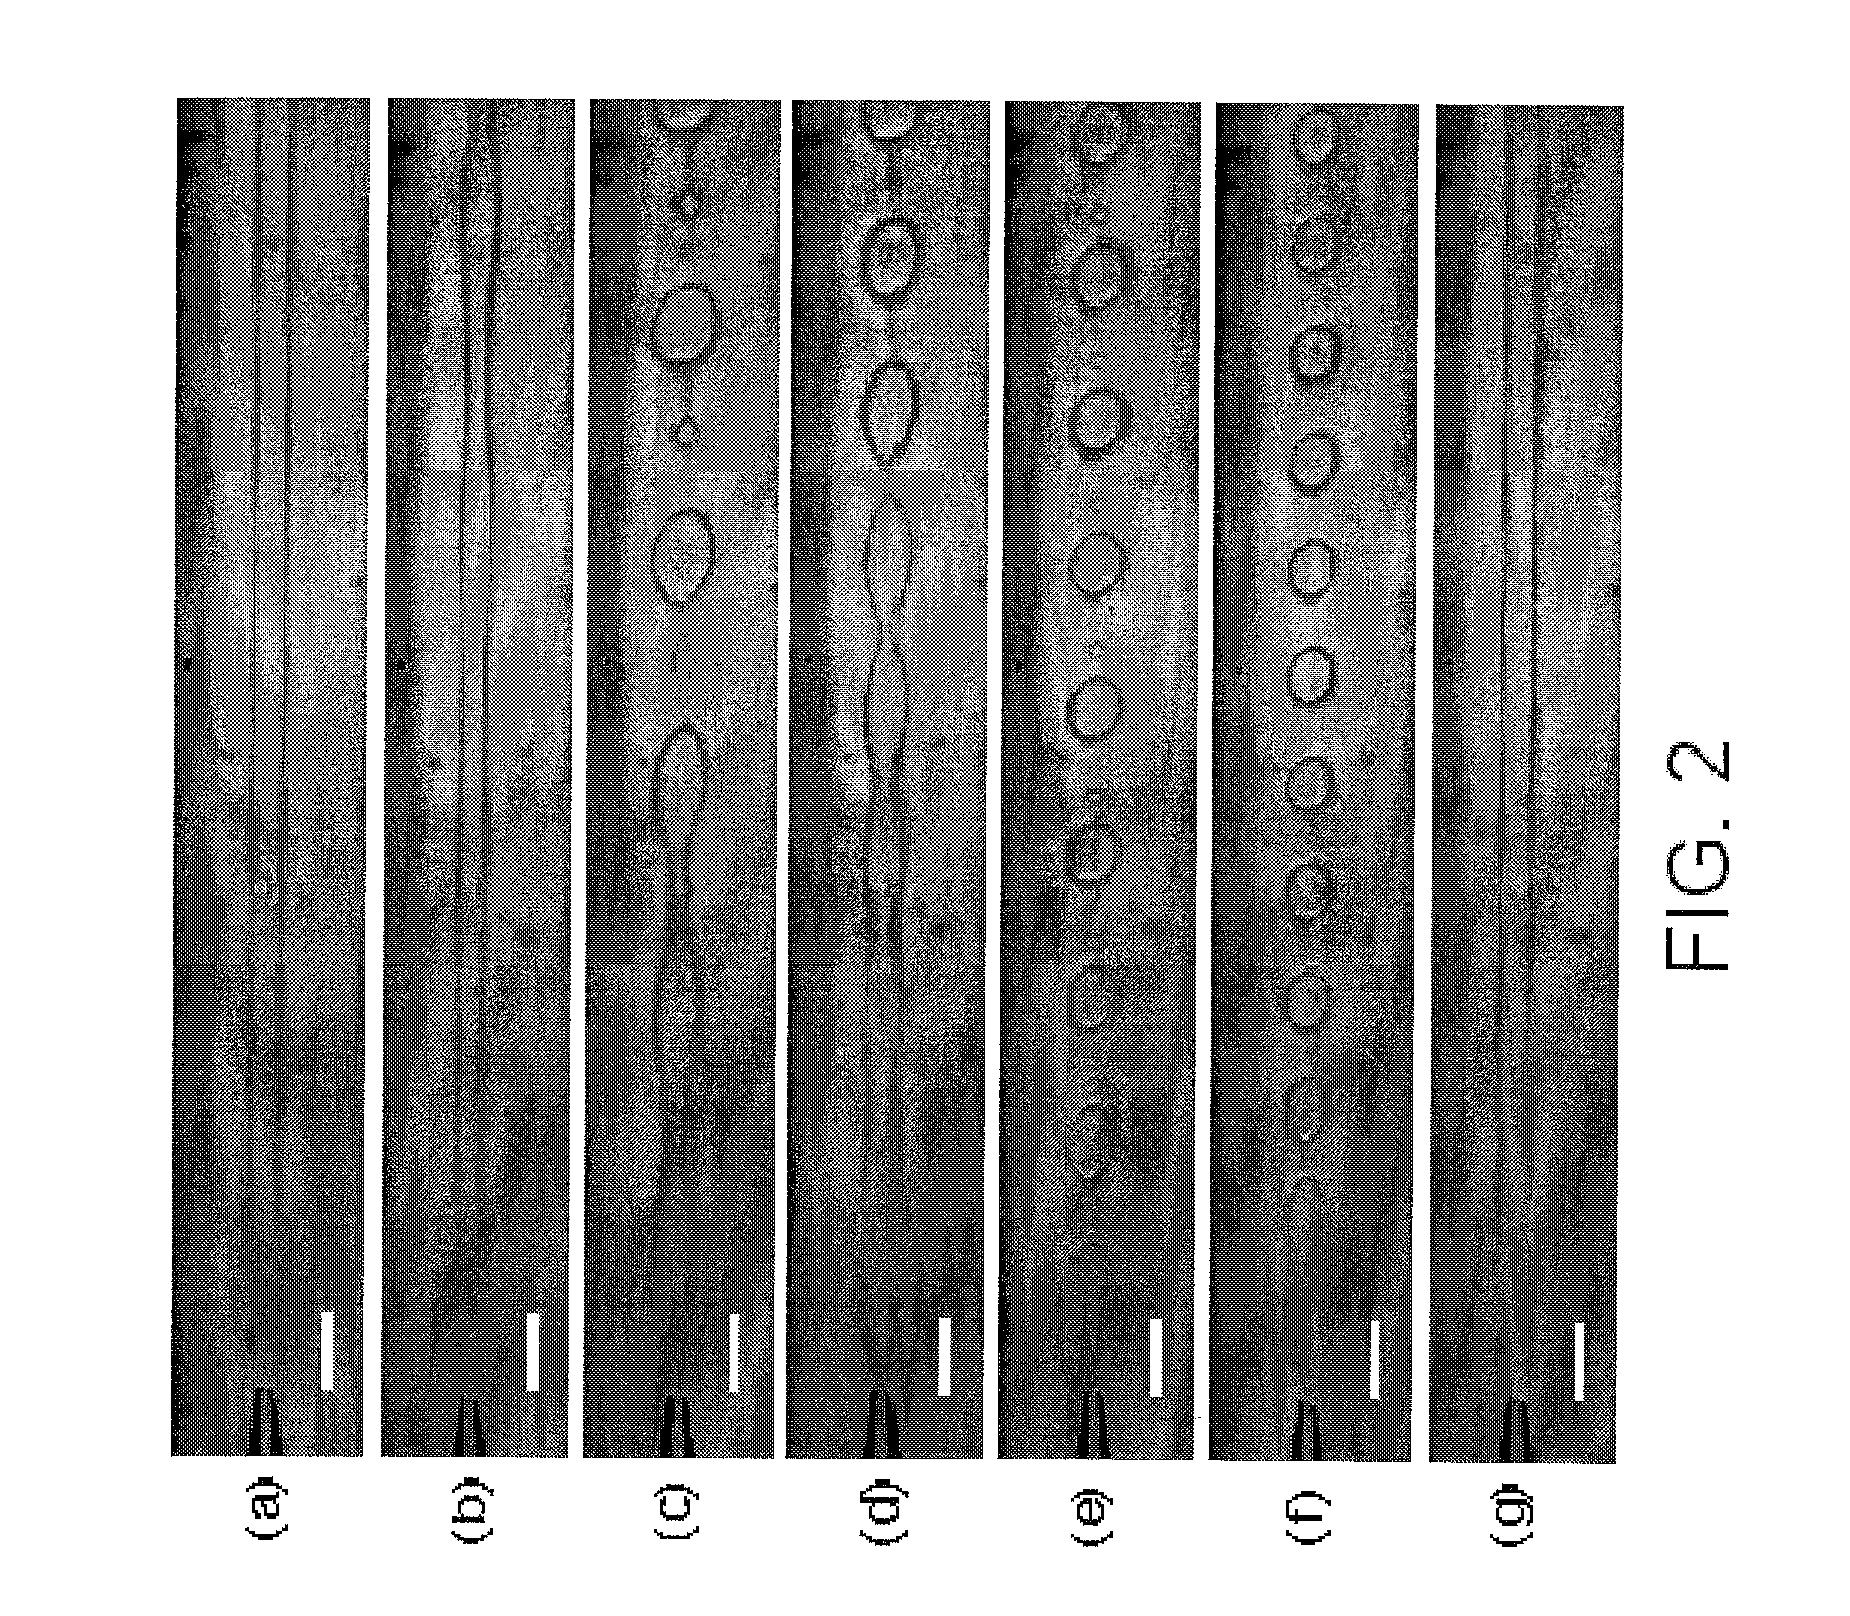 System and method for generation of emulsions with low interfacial tension and measuring frequency vibrations in the system